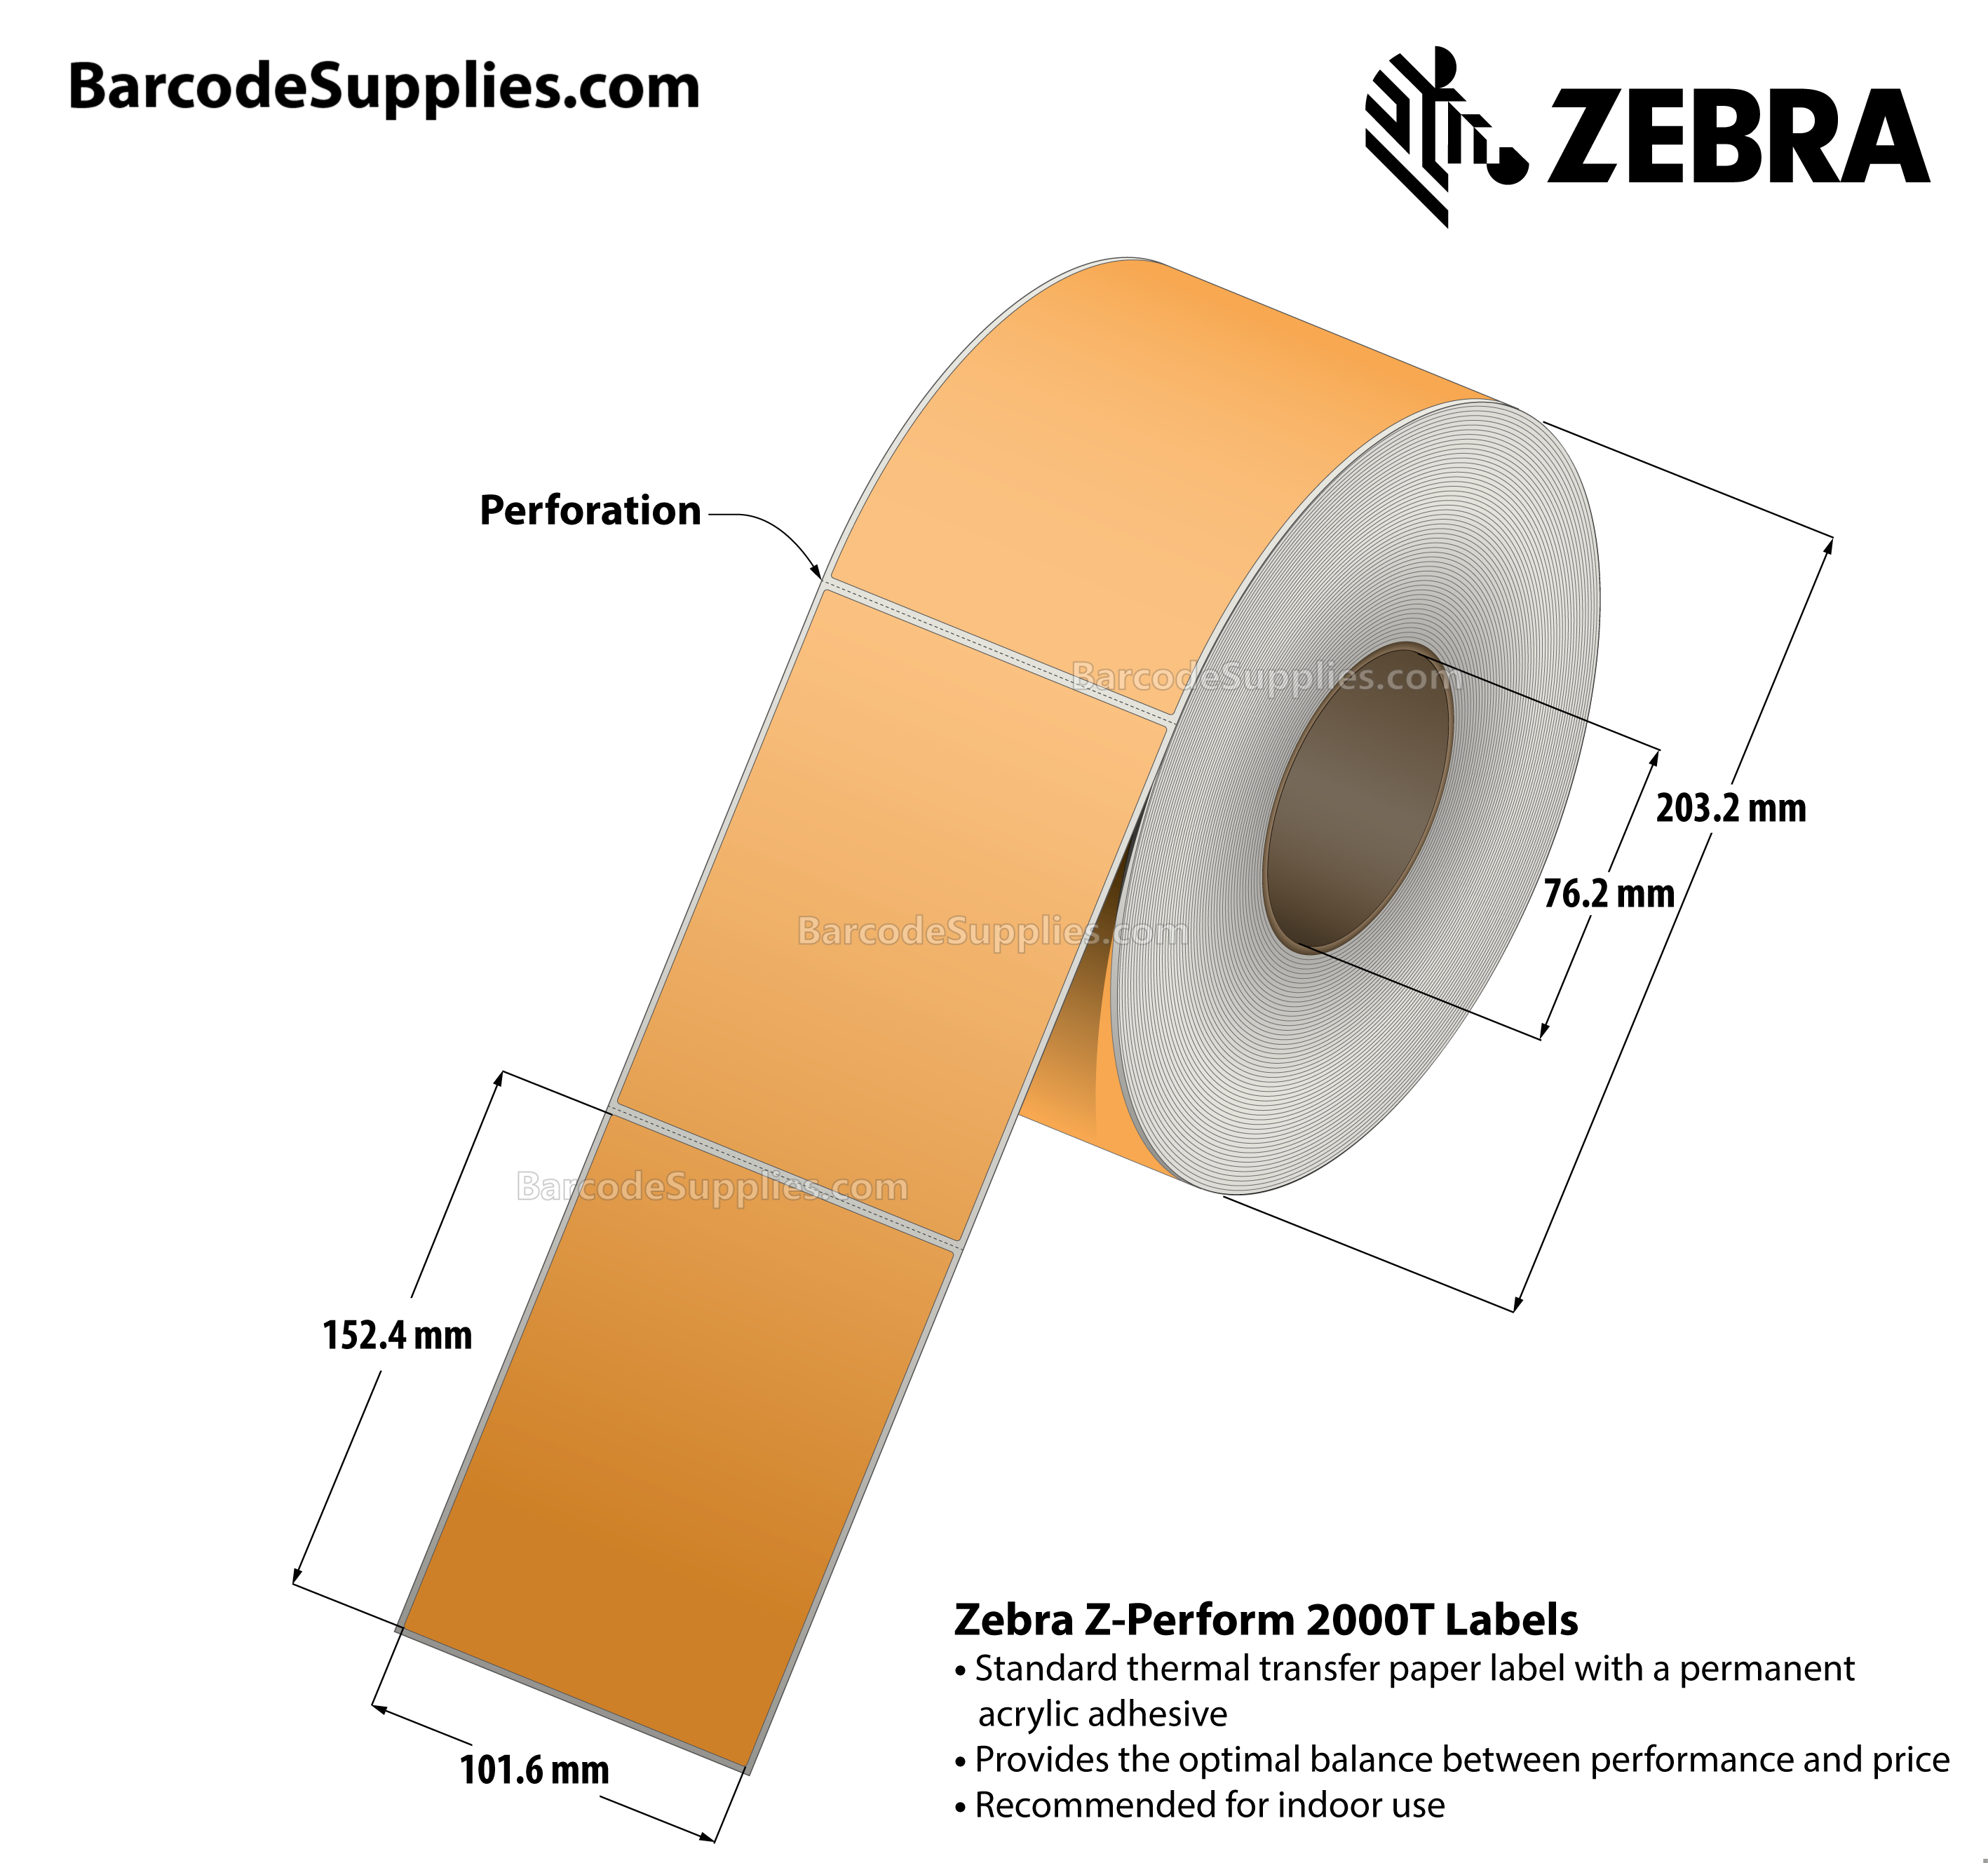 4 x 6 Thermal Transfer Fl. Orange - PMS 804 Z-Perform 2000T Floodcoated (Fl. Orange) Labels With Permanent Adhesive - Perforated - 1000 Labels Per Roll - Carton Of 4 Rolls - 4000 Labels Total - MPN: 10006208-7